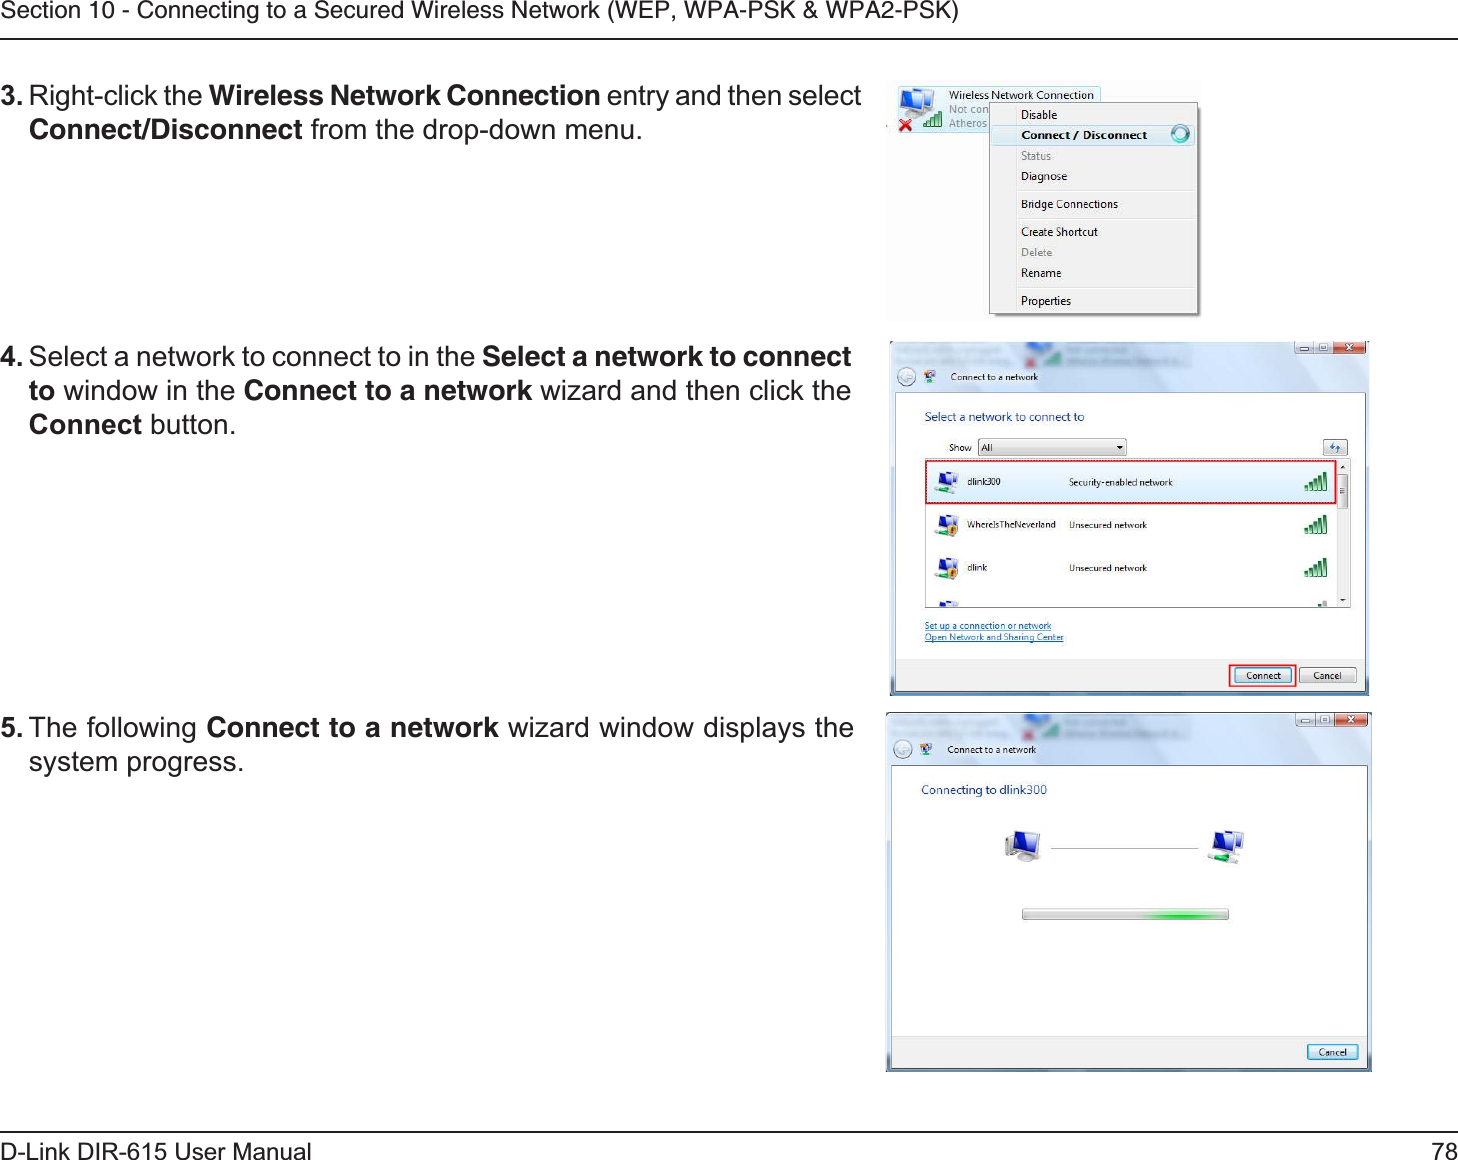 78D-Link DIR-615 User ManualSection 10 - Connecting to a Secured Wireless Network (WEP, WPA-PSK &amp; WPA2-PSK)4. Select a network to connect to in the Select a network to connectto window in the Connect to a network wizard and then click the Connect button. 5. The following Connect to a network wizard window displays the system progress. 3. Right-click the Wireless Network Connection entry and then select Connect/Disconnect from the drop-down menu. 